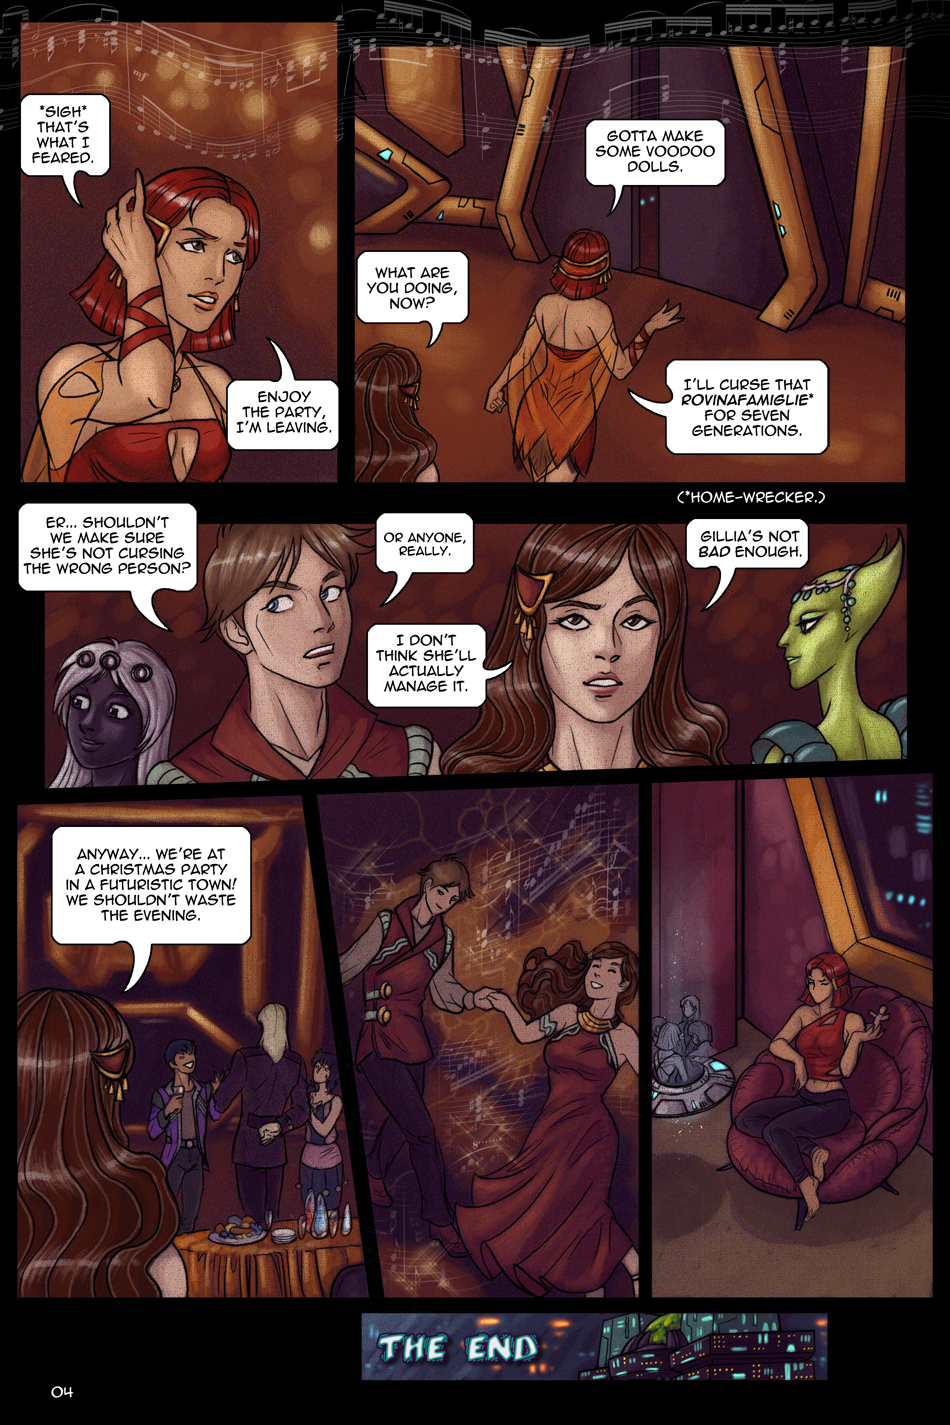 The Strangest Coven by Whiteshaix Page 4 of 4